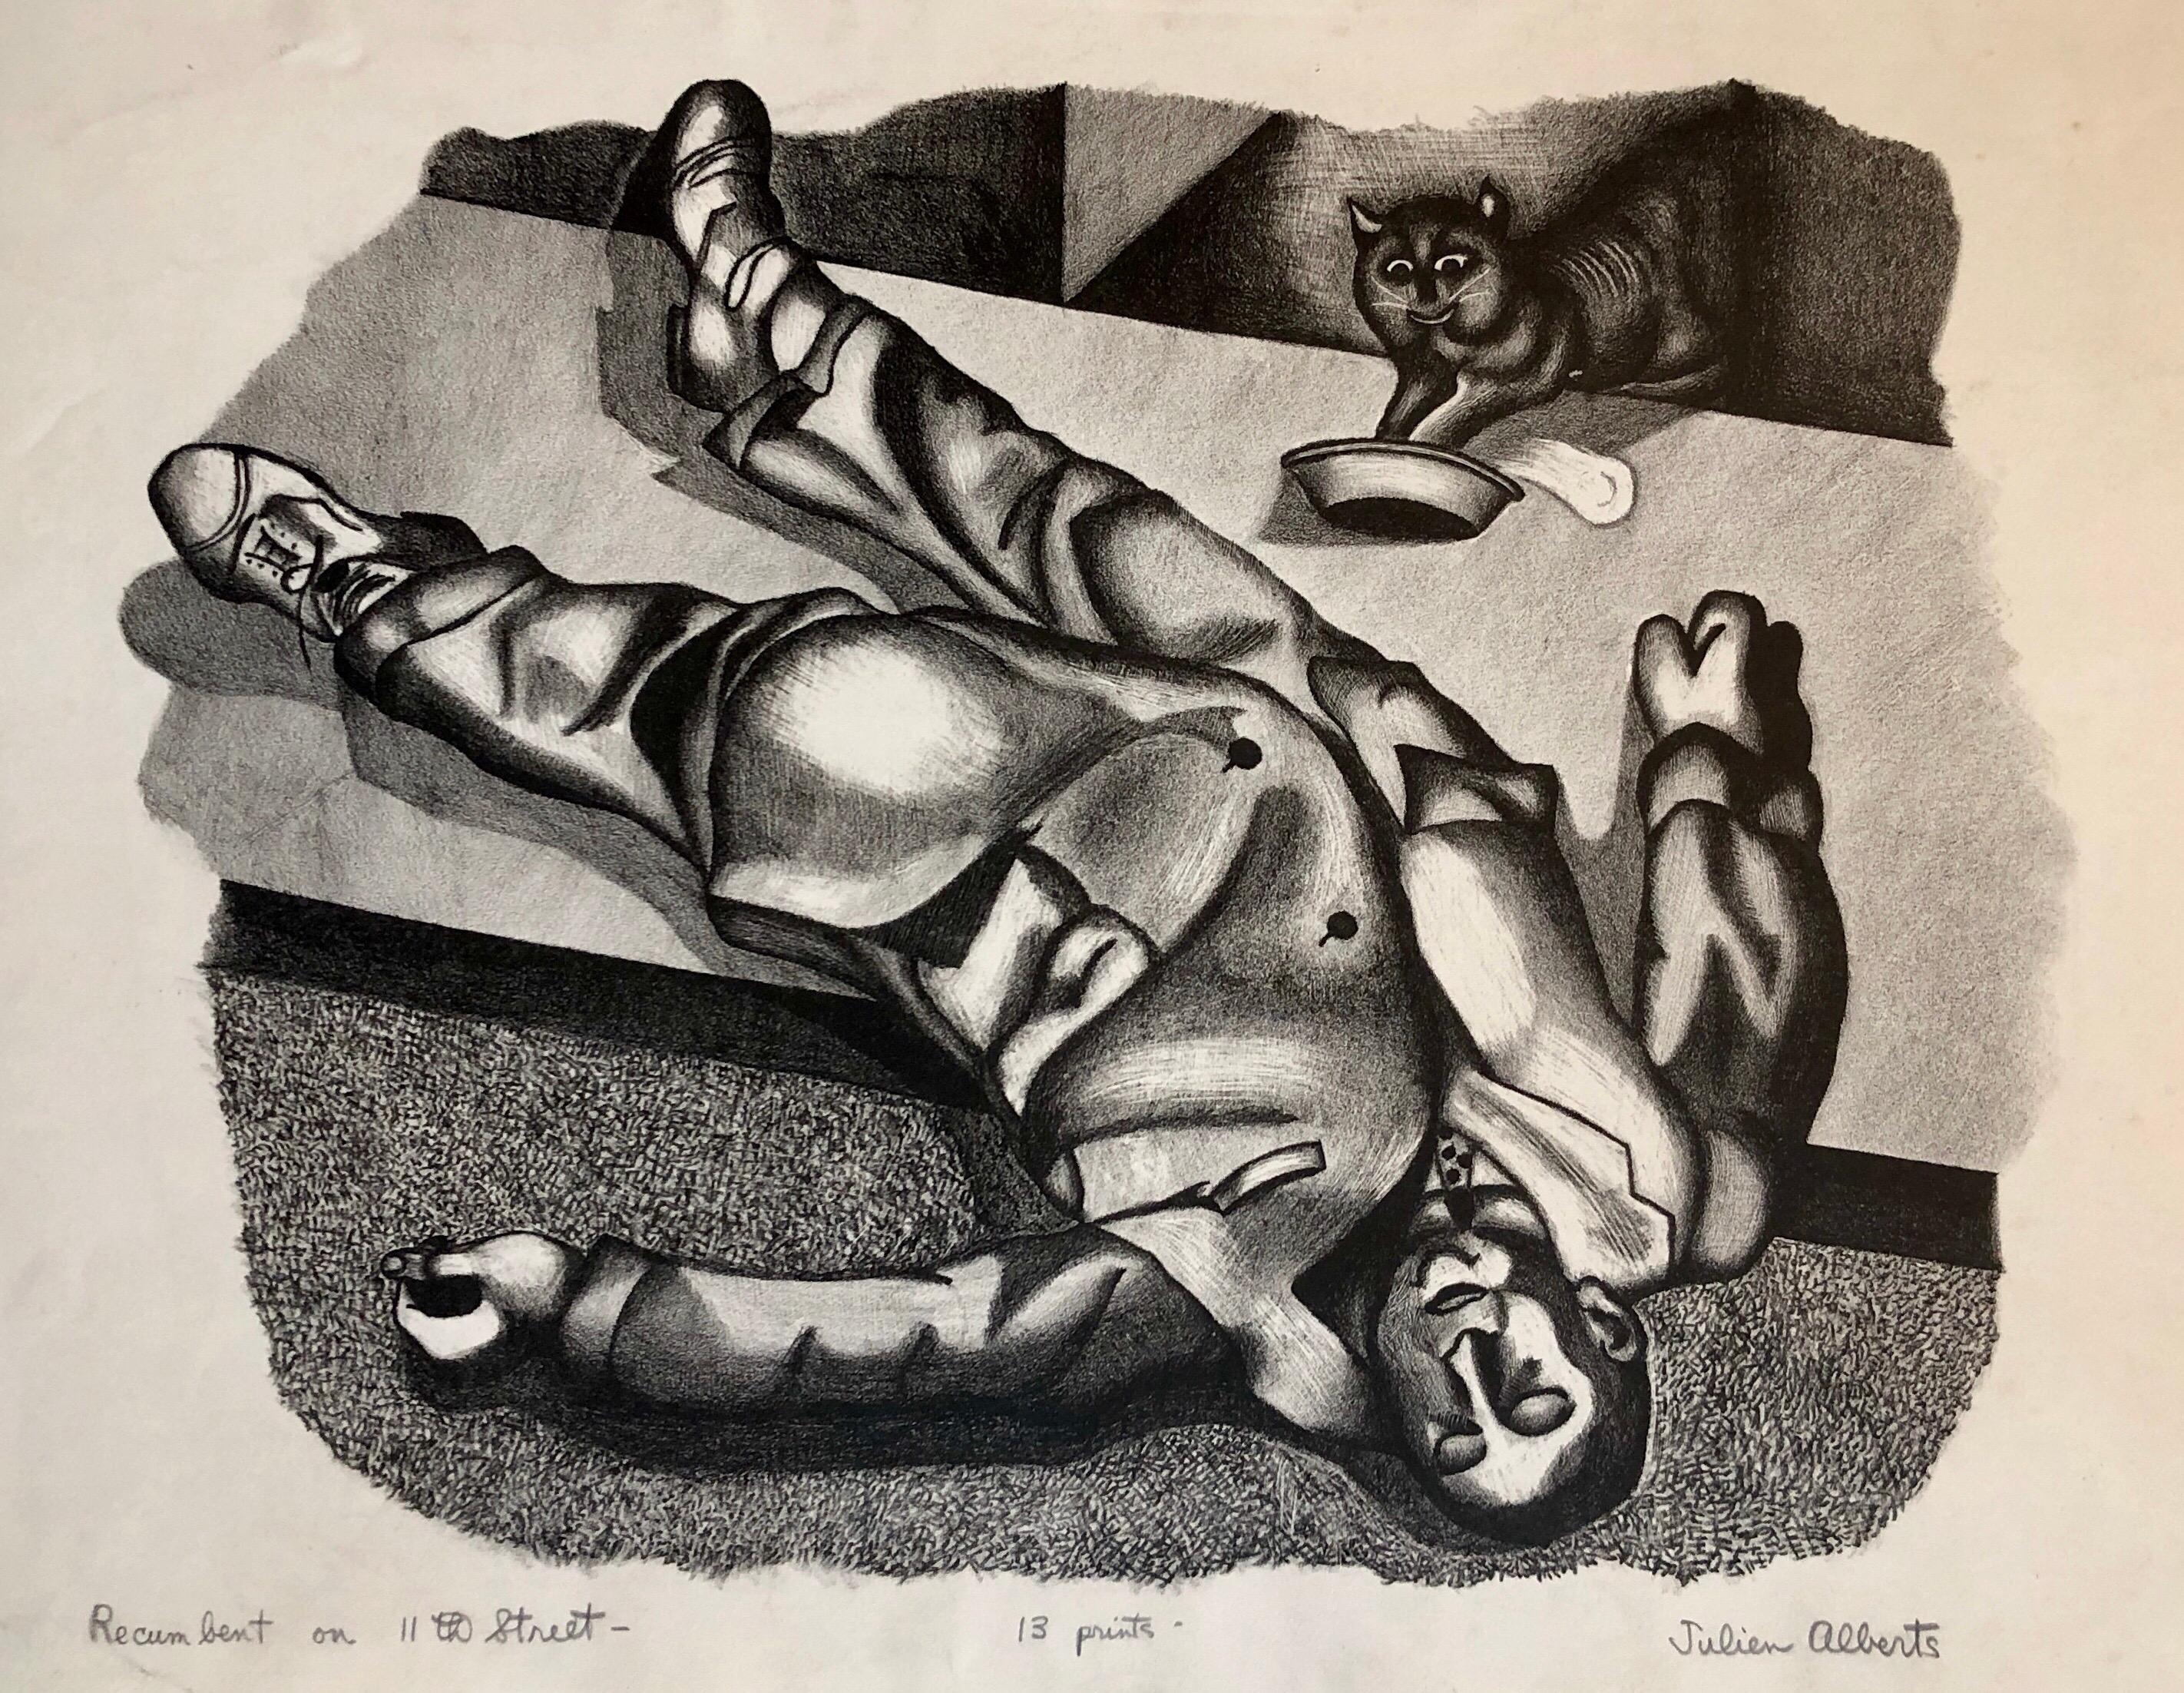 Recumbent on 11th st. NYC Drunk 1930's Social Realist Lithograph